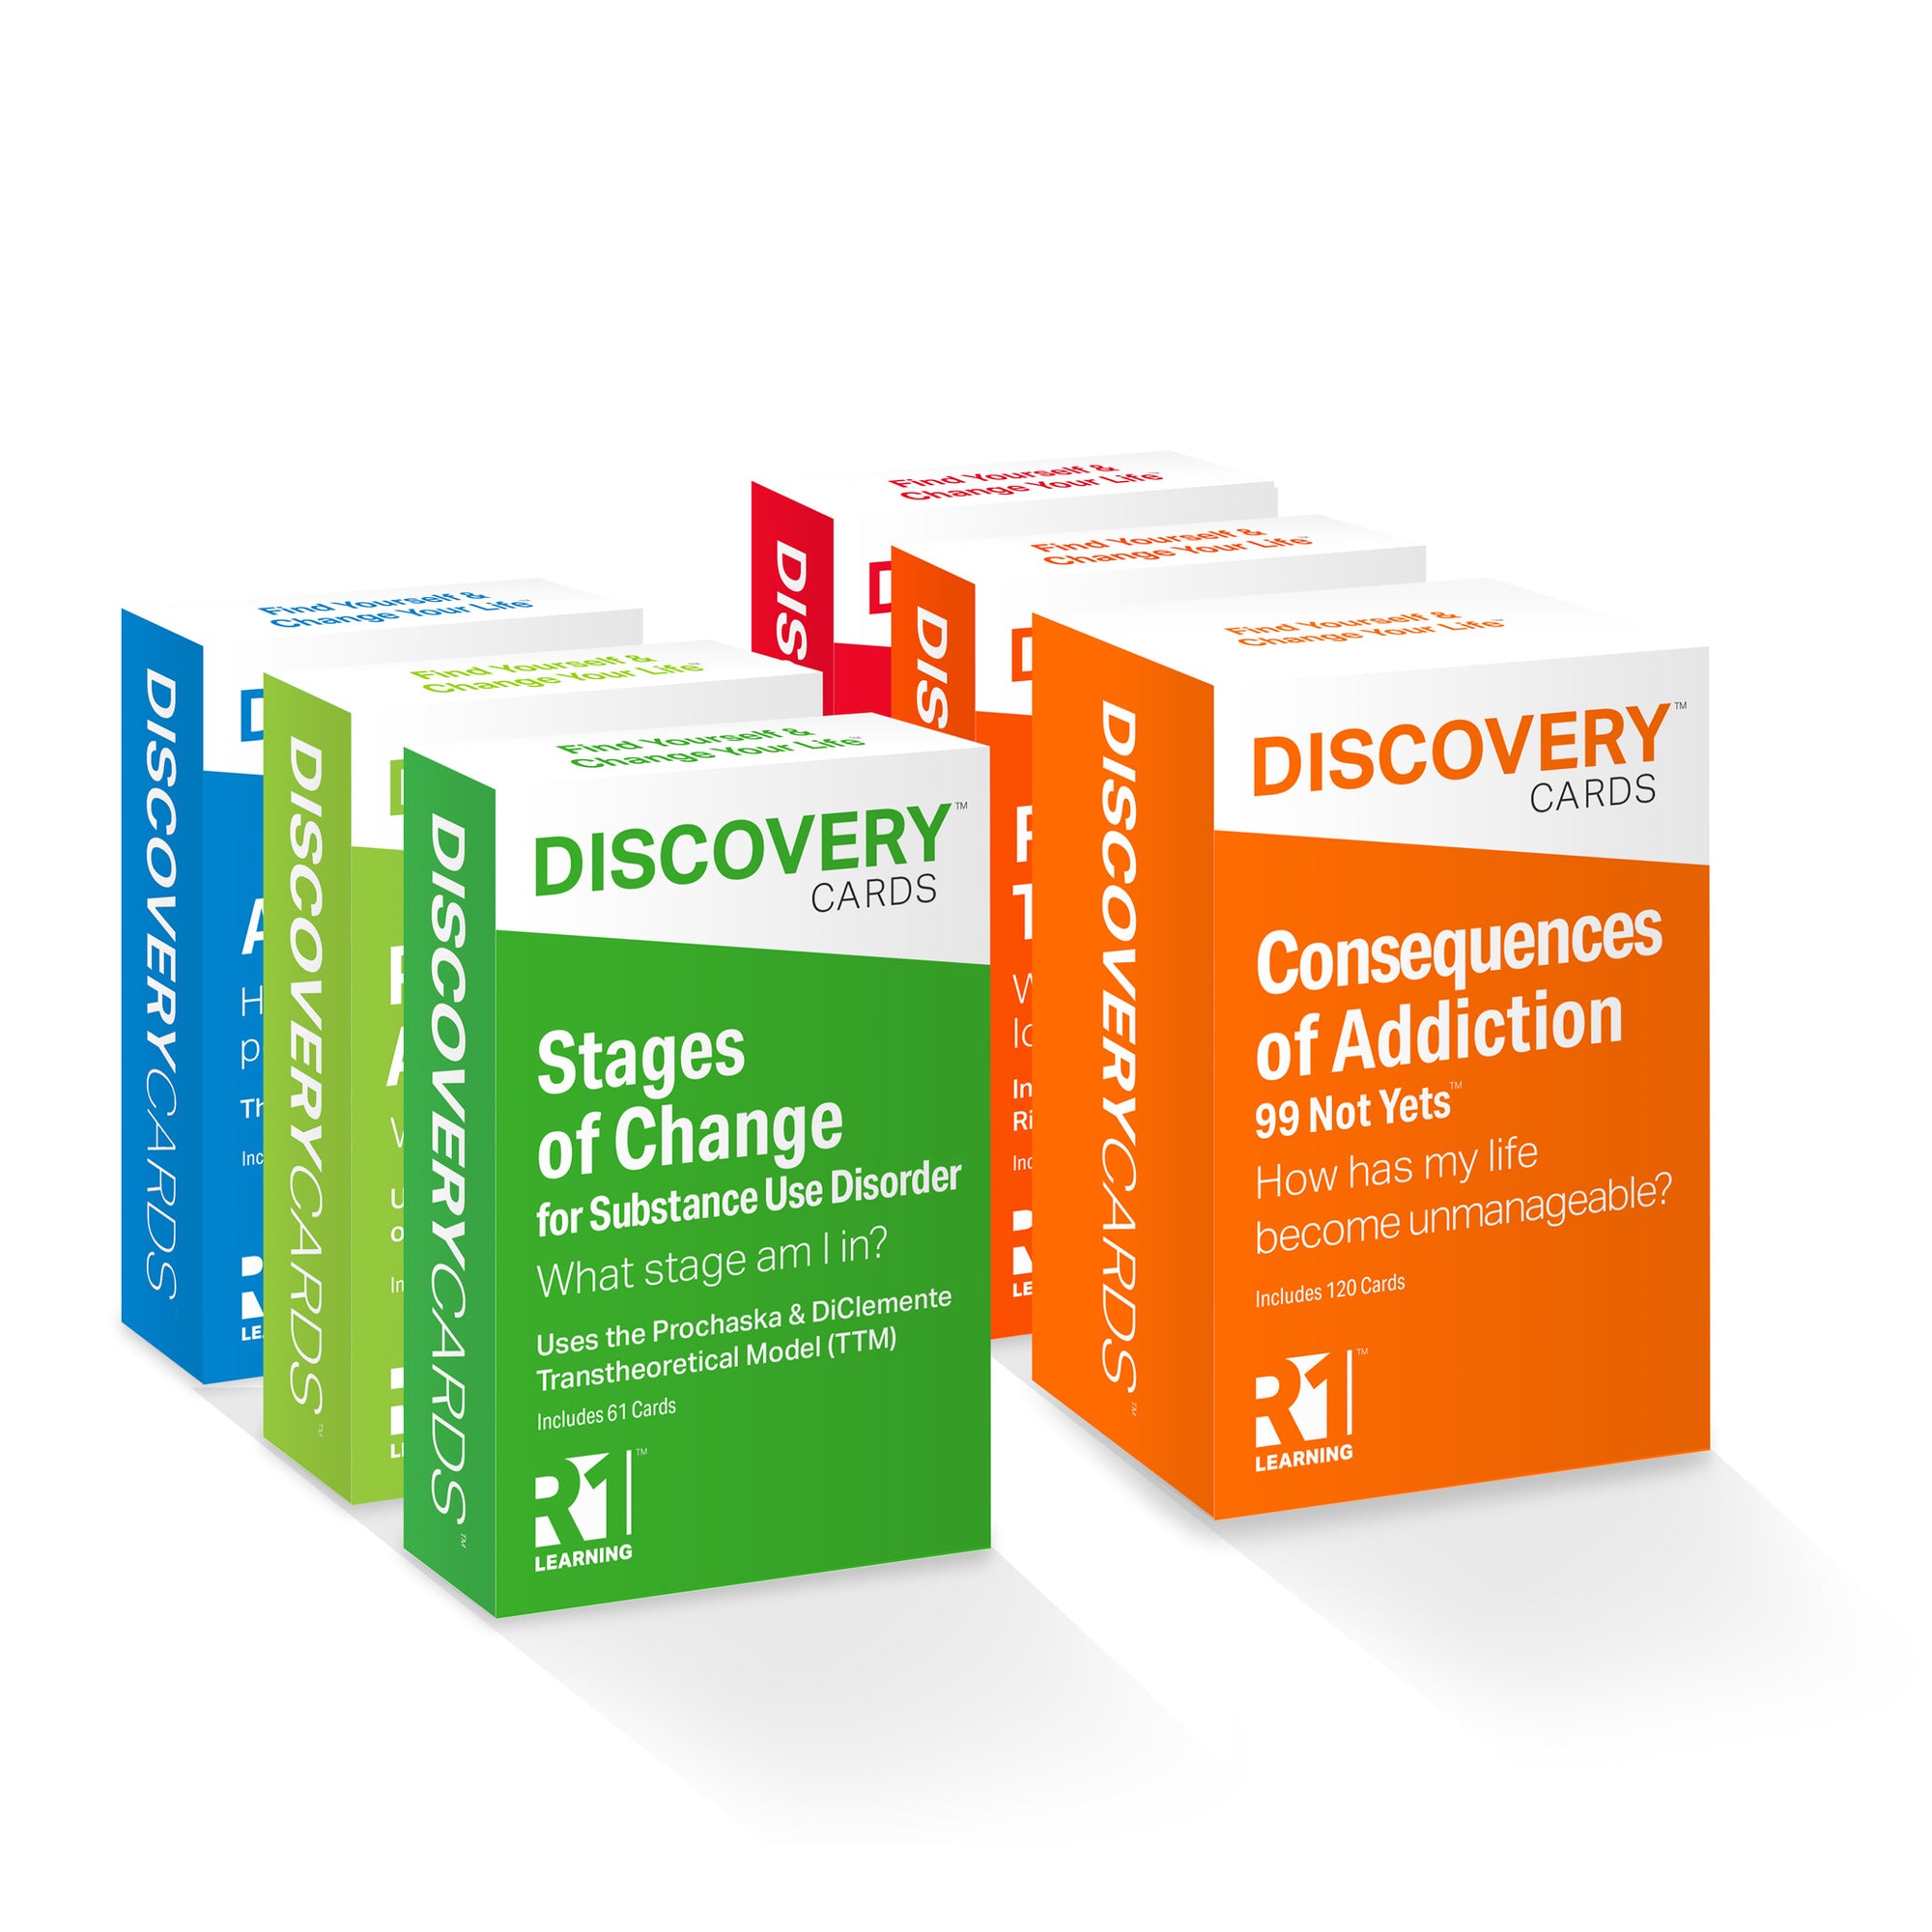 Discovery Cards Variety Pack - 6 Decks